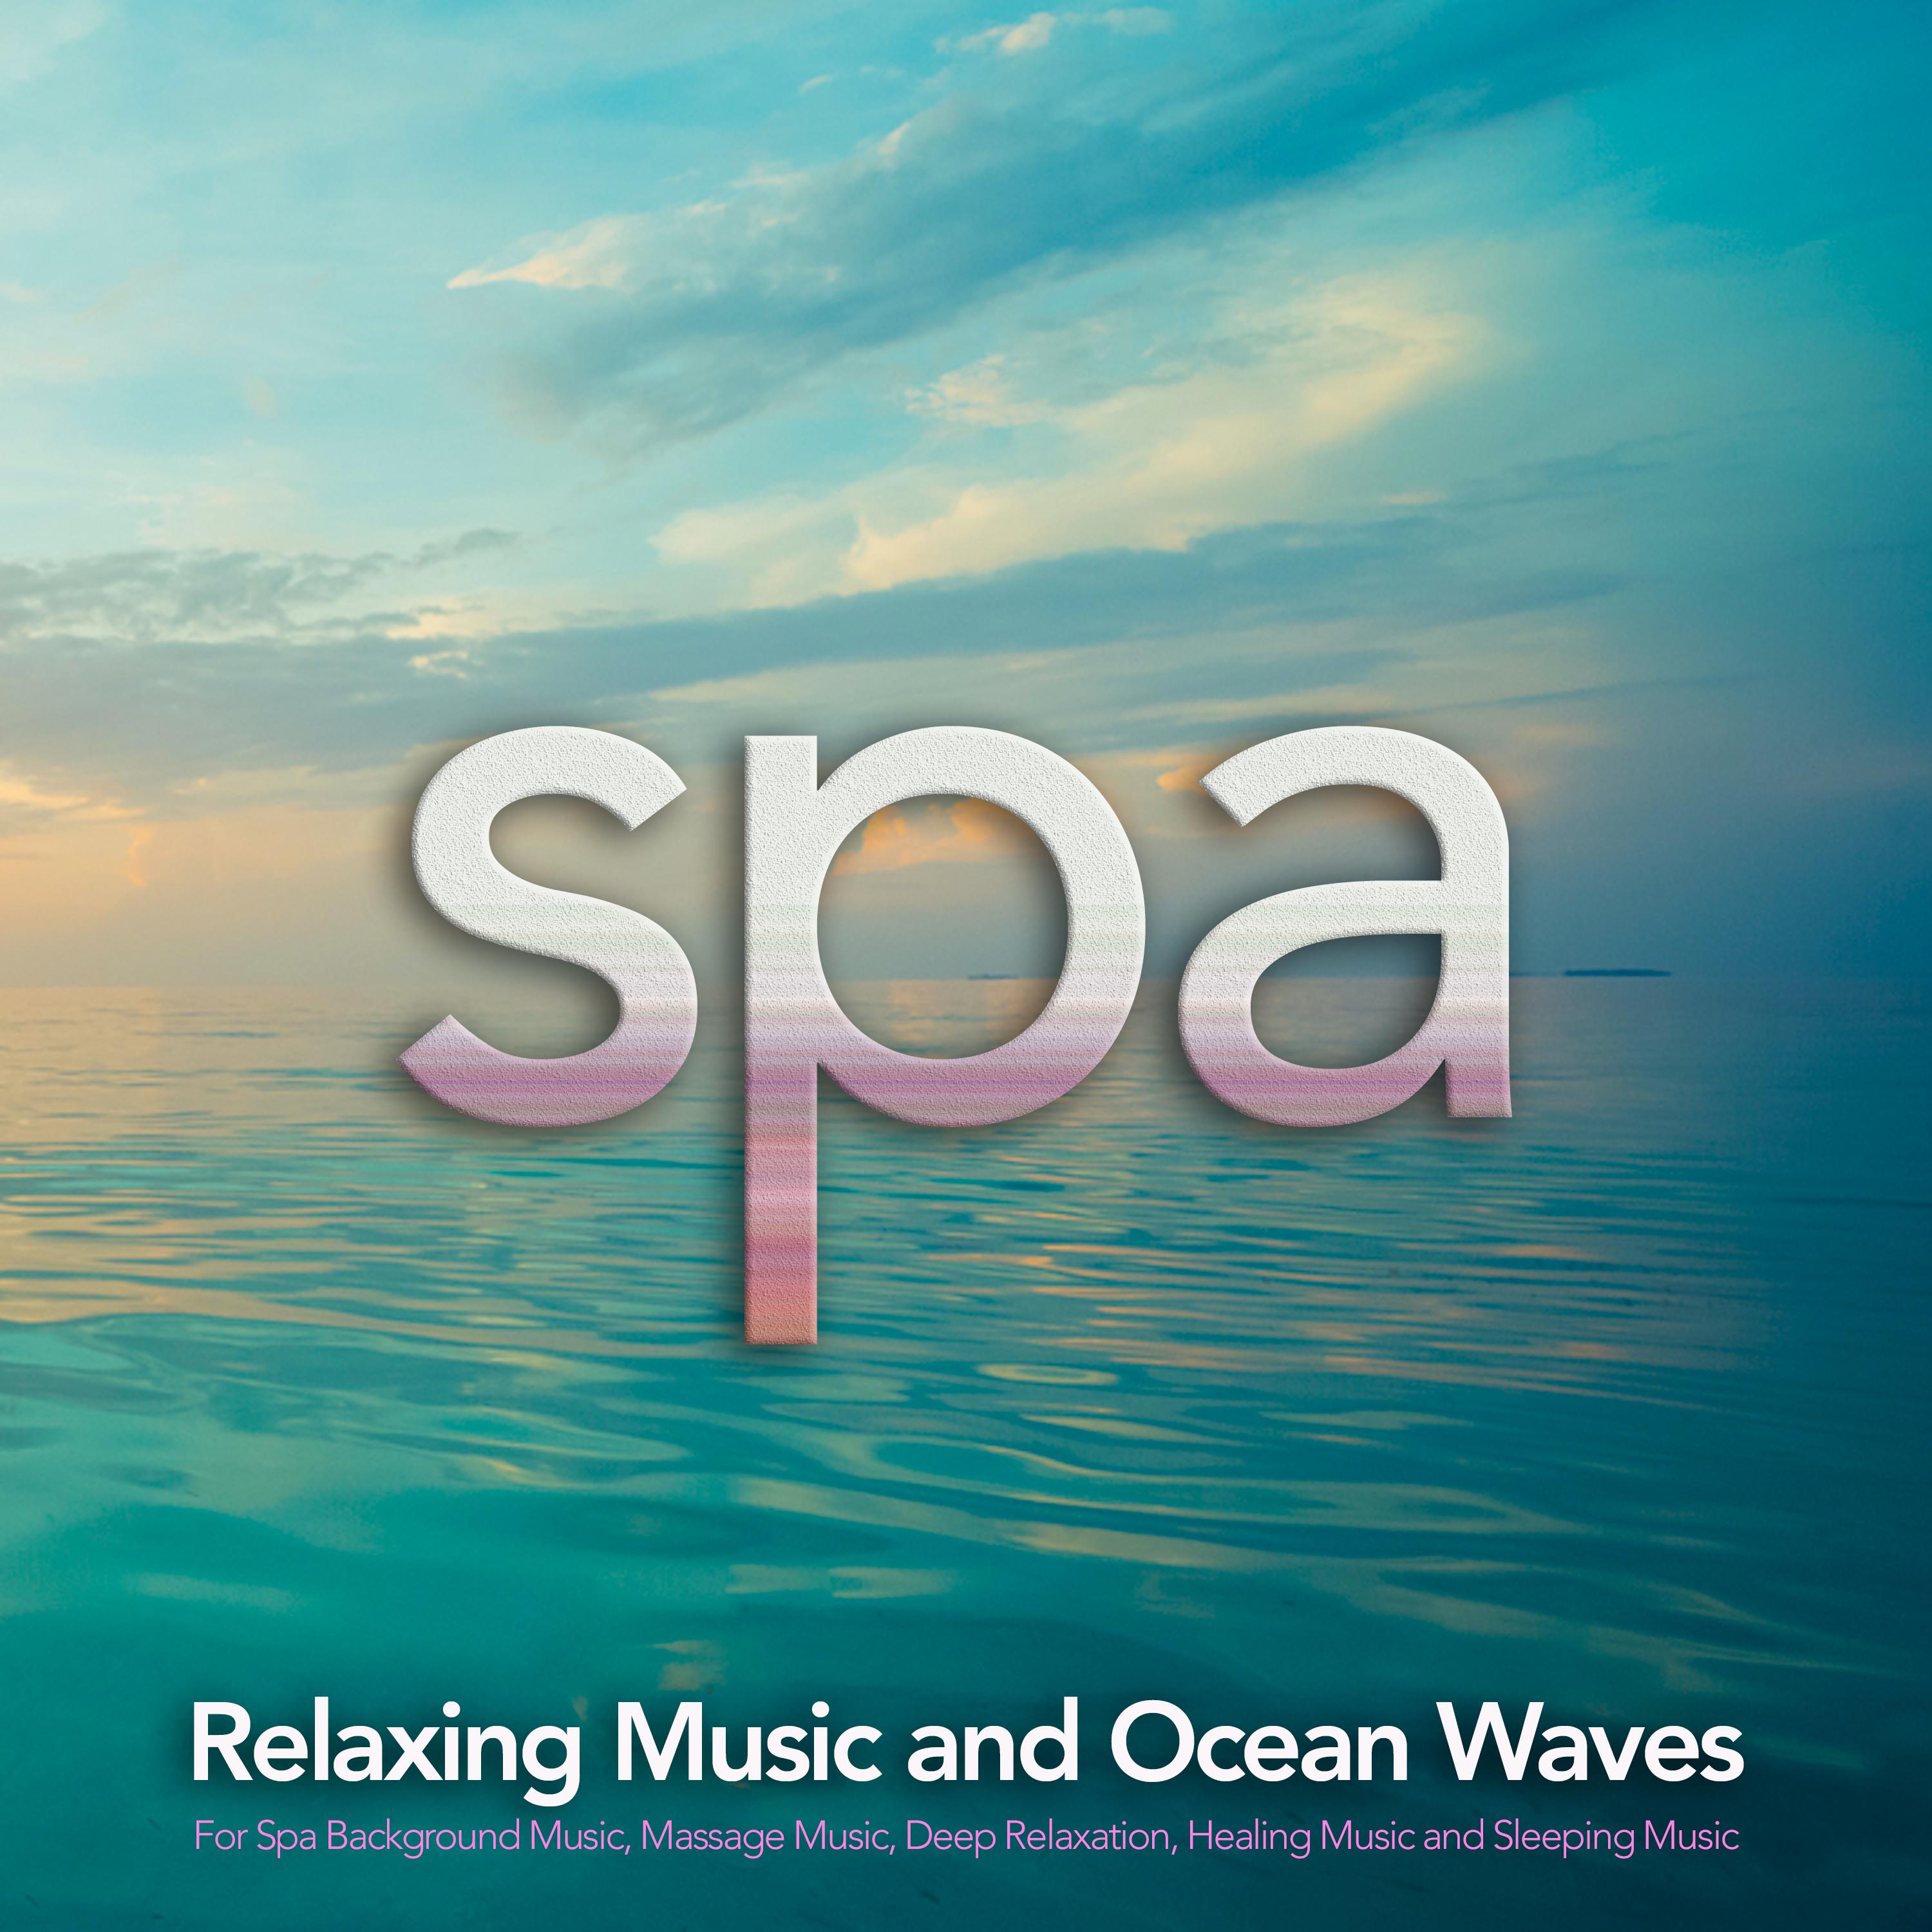 Calm Ocean Waves For Relaxation